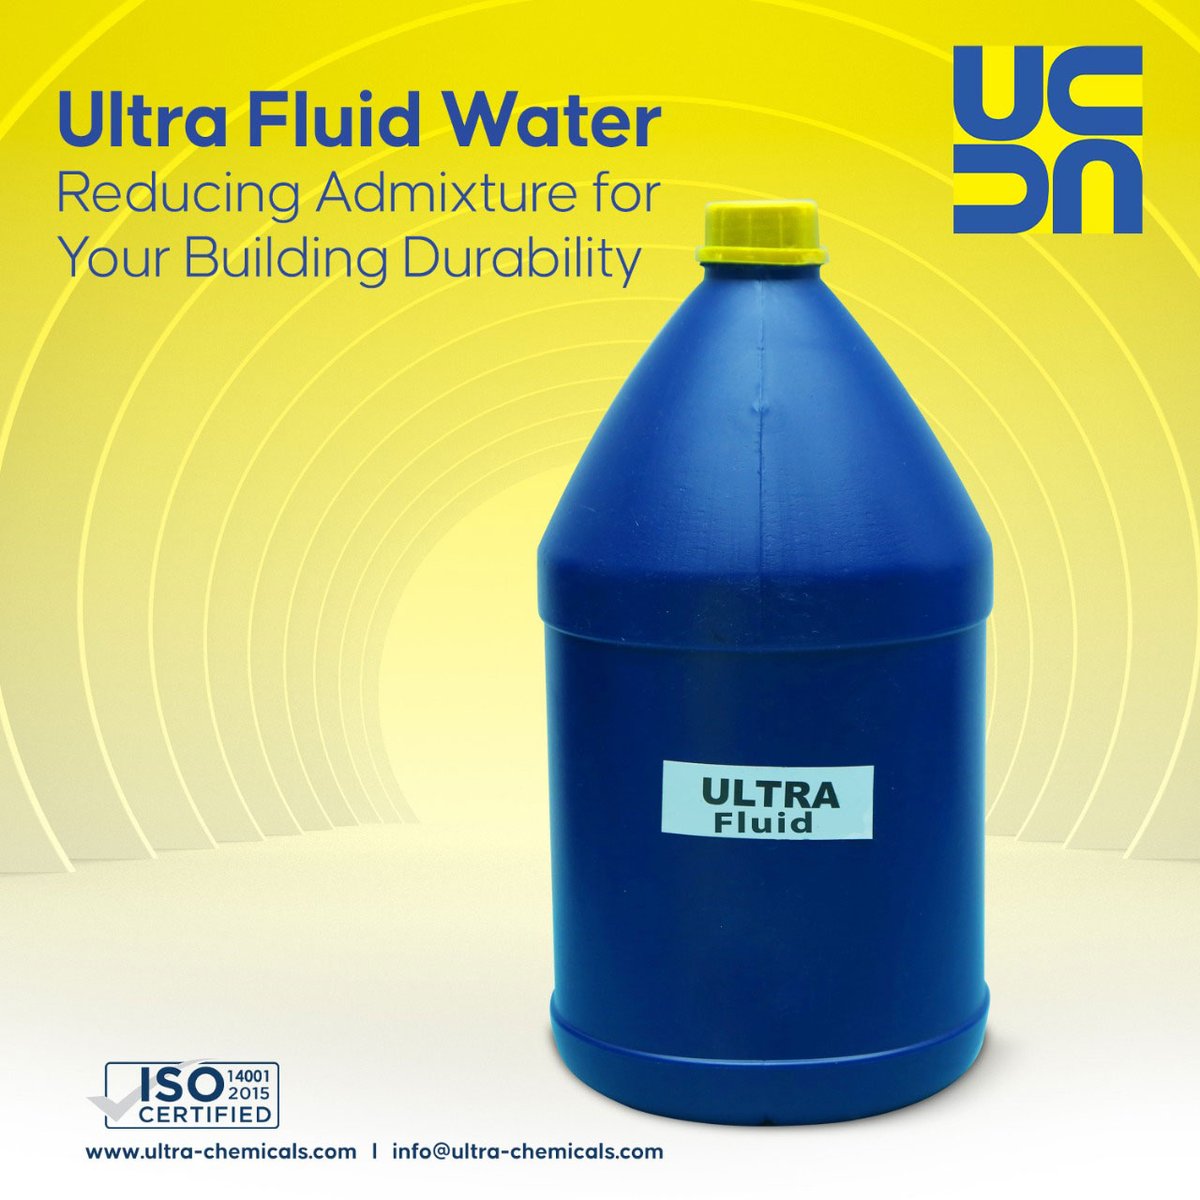 Ultra Fluid is a water-reducing and plasticizing admixture for concrete.
☎️ : 04235445668
📱 : 03214711816
#constructionchemicals #fluid #ultrafluid #power2000 #concreteadmixture #concrete #waterproofing #weatherguard #epoxygrout #wallputty #wallprimer #waterproofing #waterproof